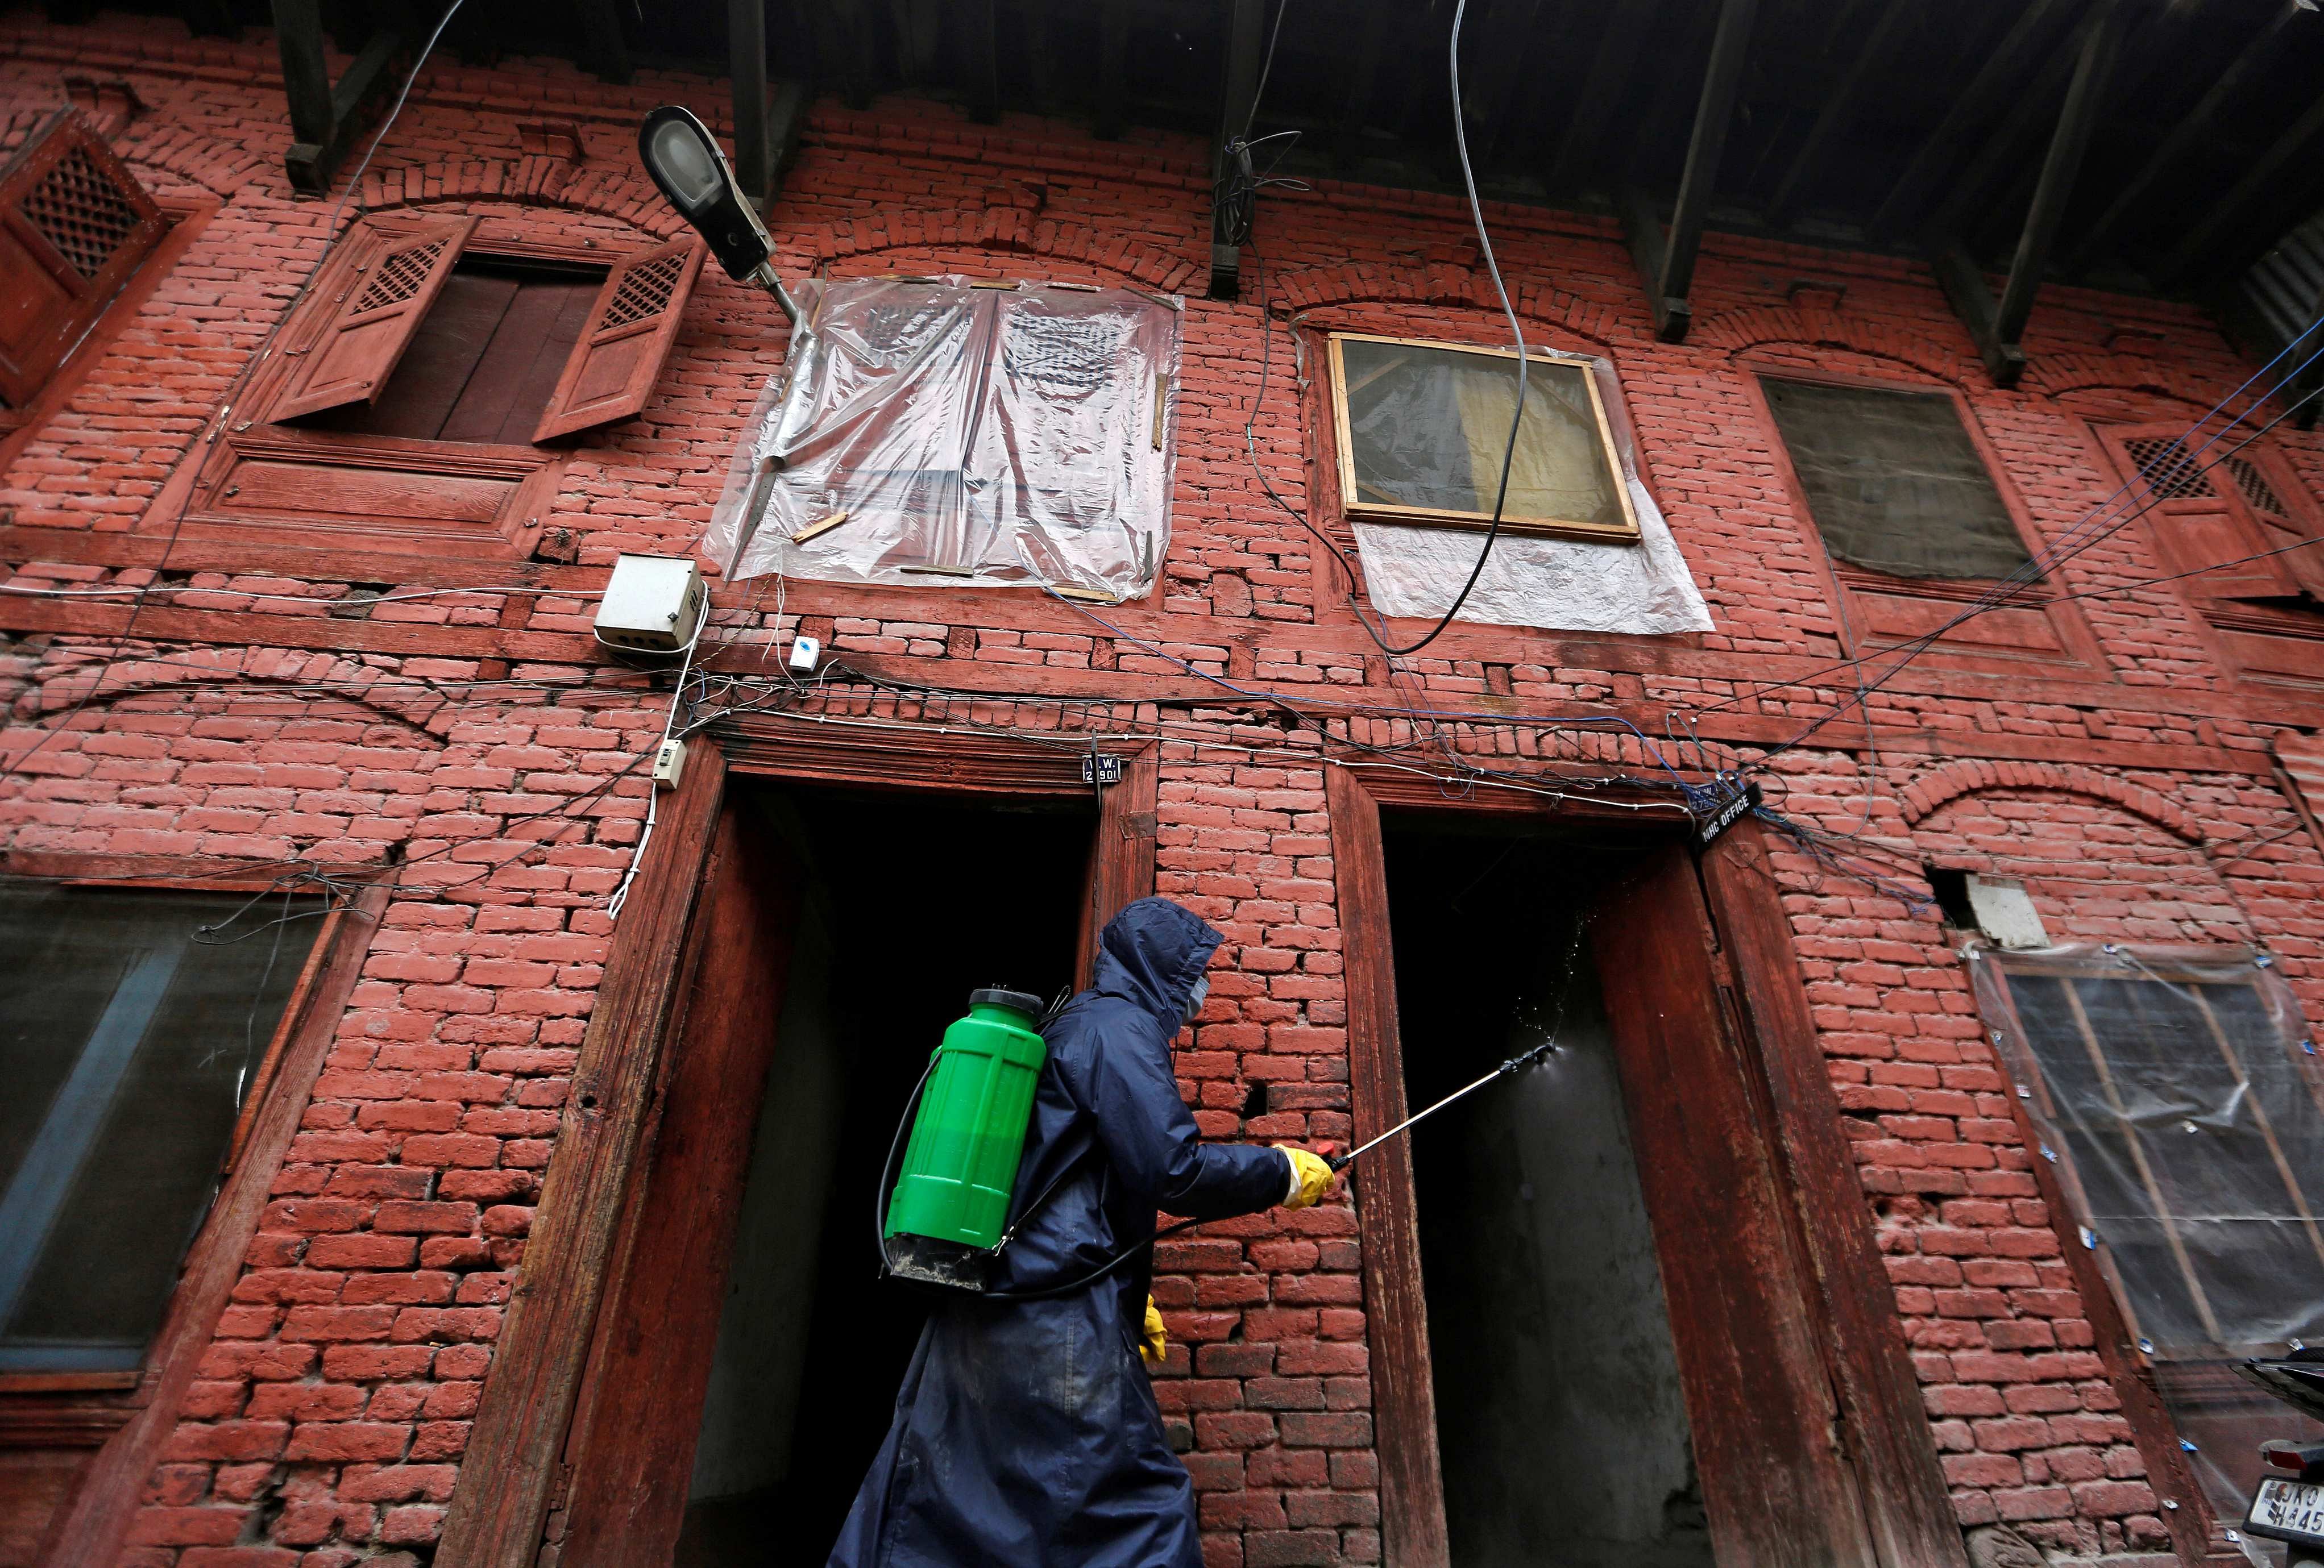 A municipal worker wearing a protective suit disinfects the premises of a police station in Srinagar. (Credit: Reuters)